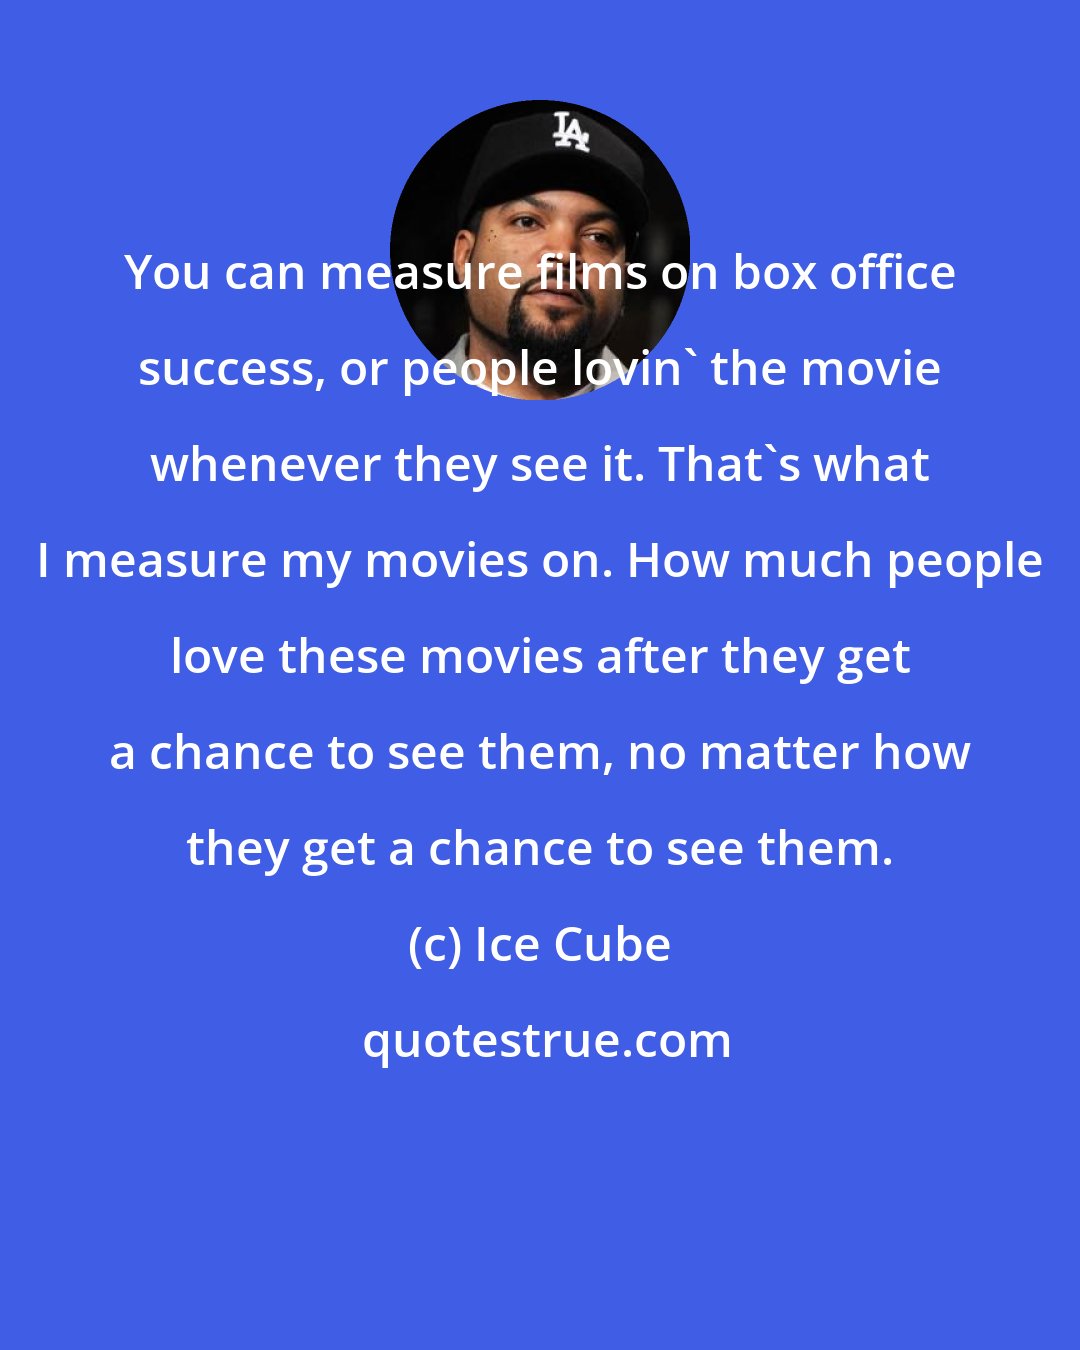 Ice Cube: You can measure films on box office success, or people lovin' the movie whenever they see it. That's what I measure my movies on. How much people love these movies after they get a chance to see them, no matter how they get a chance to see them.